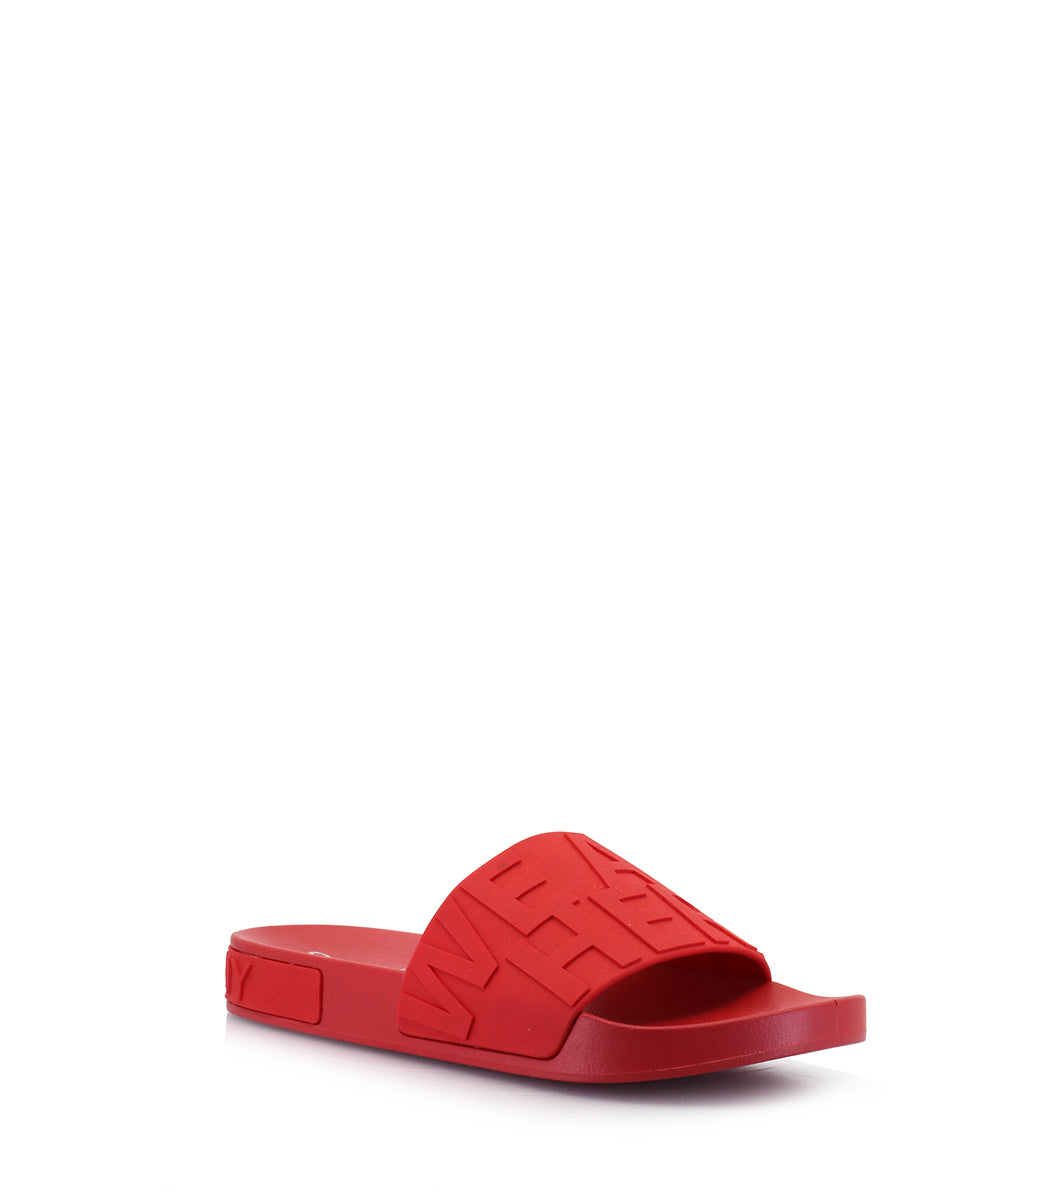 HERE RED SANDALS